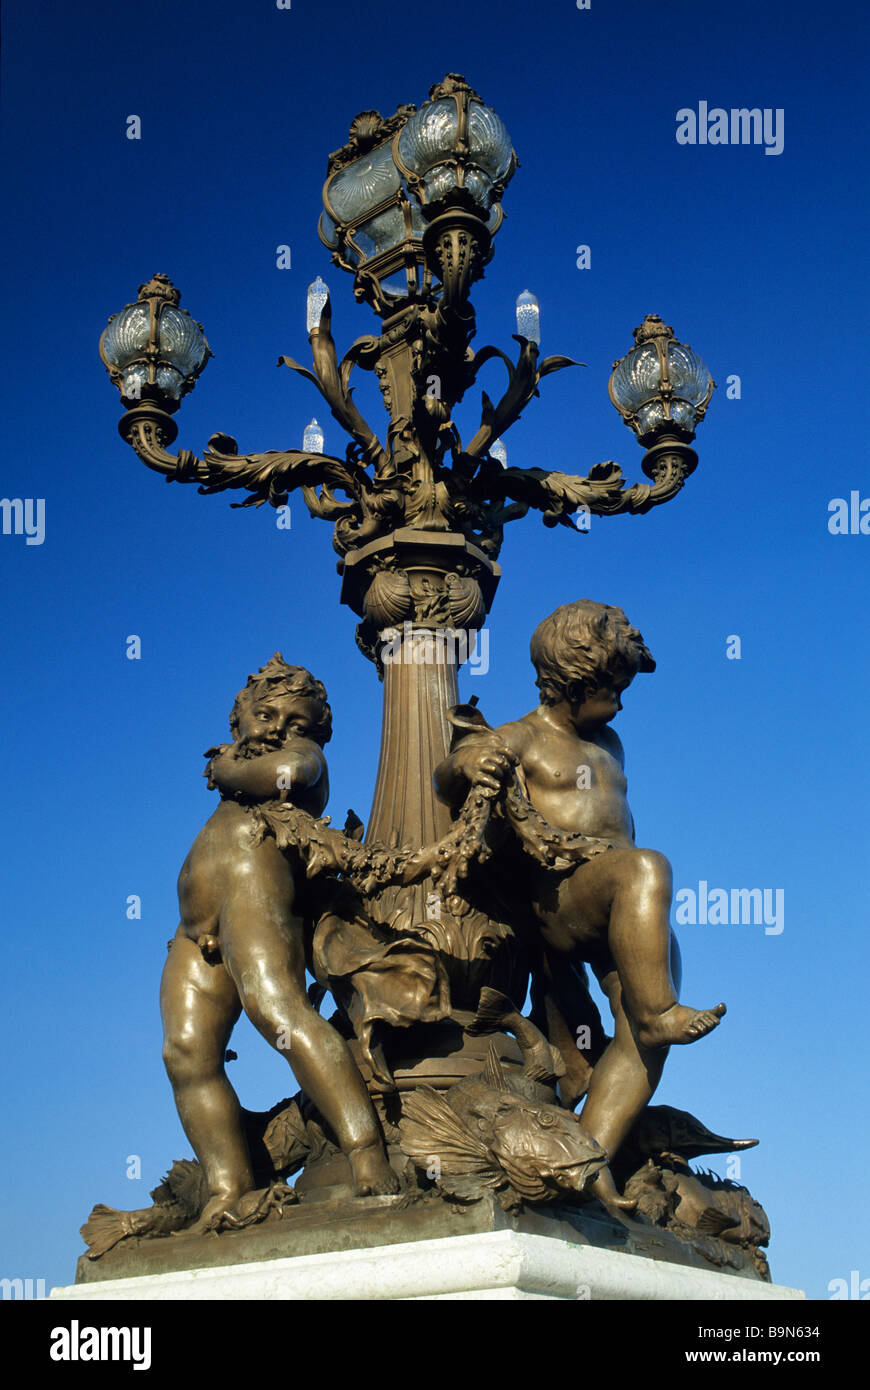 France, Paris, Pont Alexandre III, bronze lamppost, Ronde d'Amours (Loves Round) sculpture mounting the bridge balustrade Stock Photo